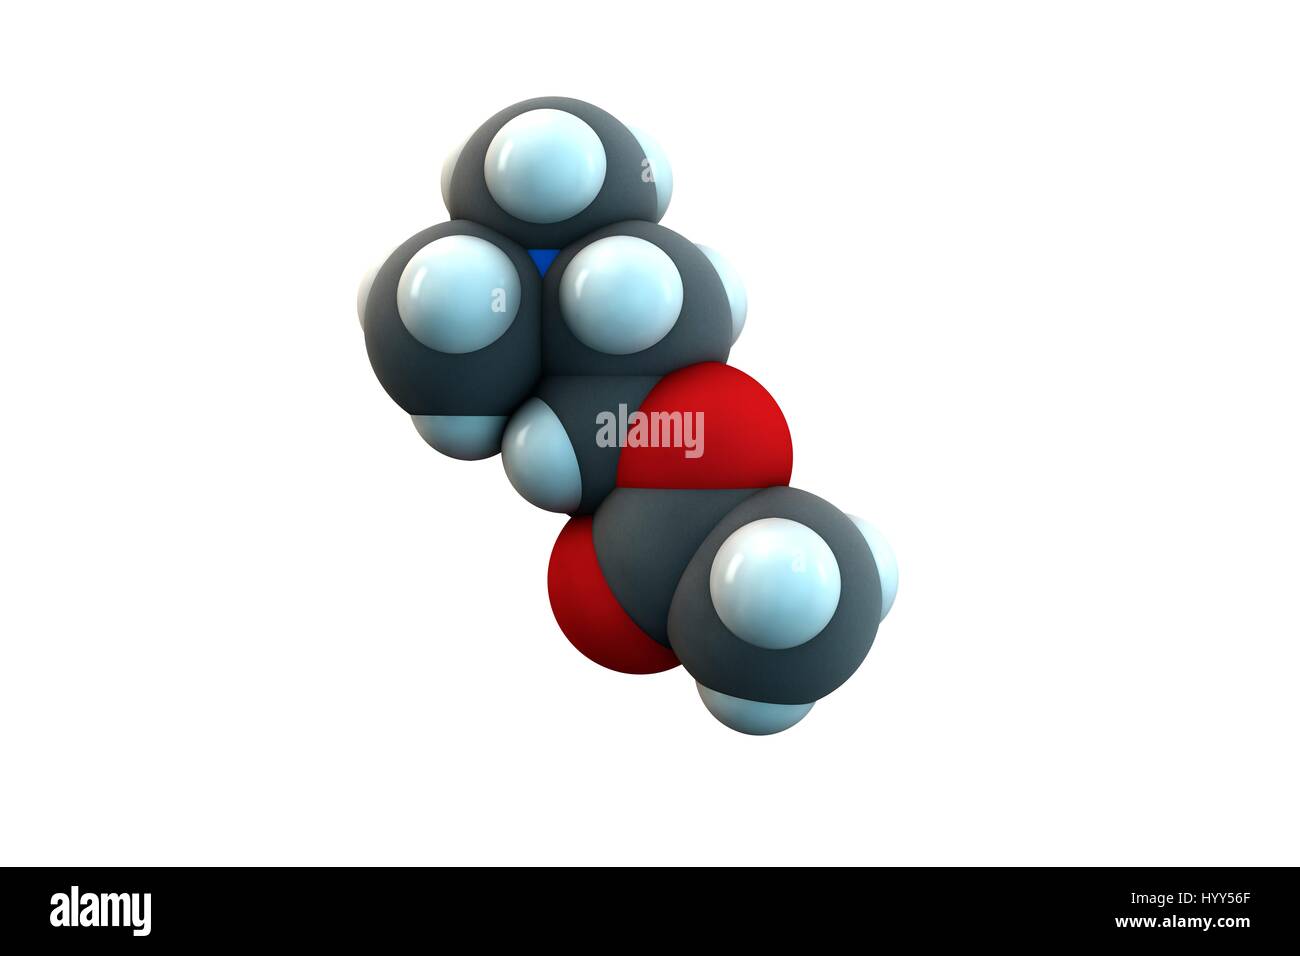 Acetylcholine neurotransmitter molecule. Chemical formula is C7H16NO2. Atoms are represented as spheres: carbon (grey), hydrogen (white), nitrogen (blue), oxygen (red). Illustration. Stock Photo